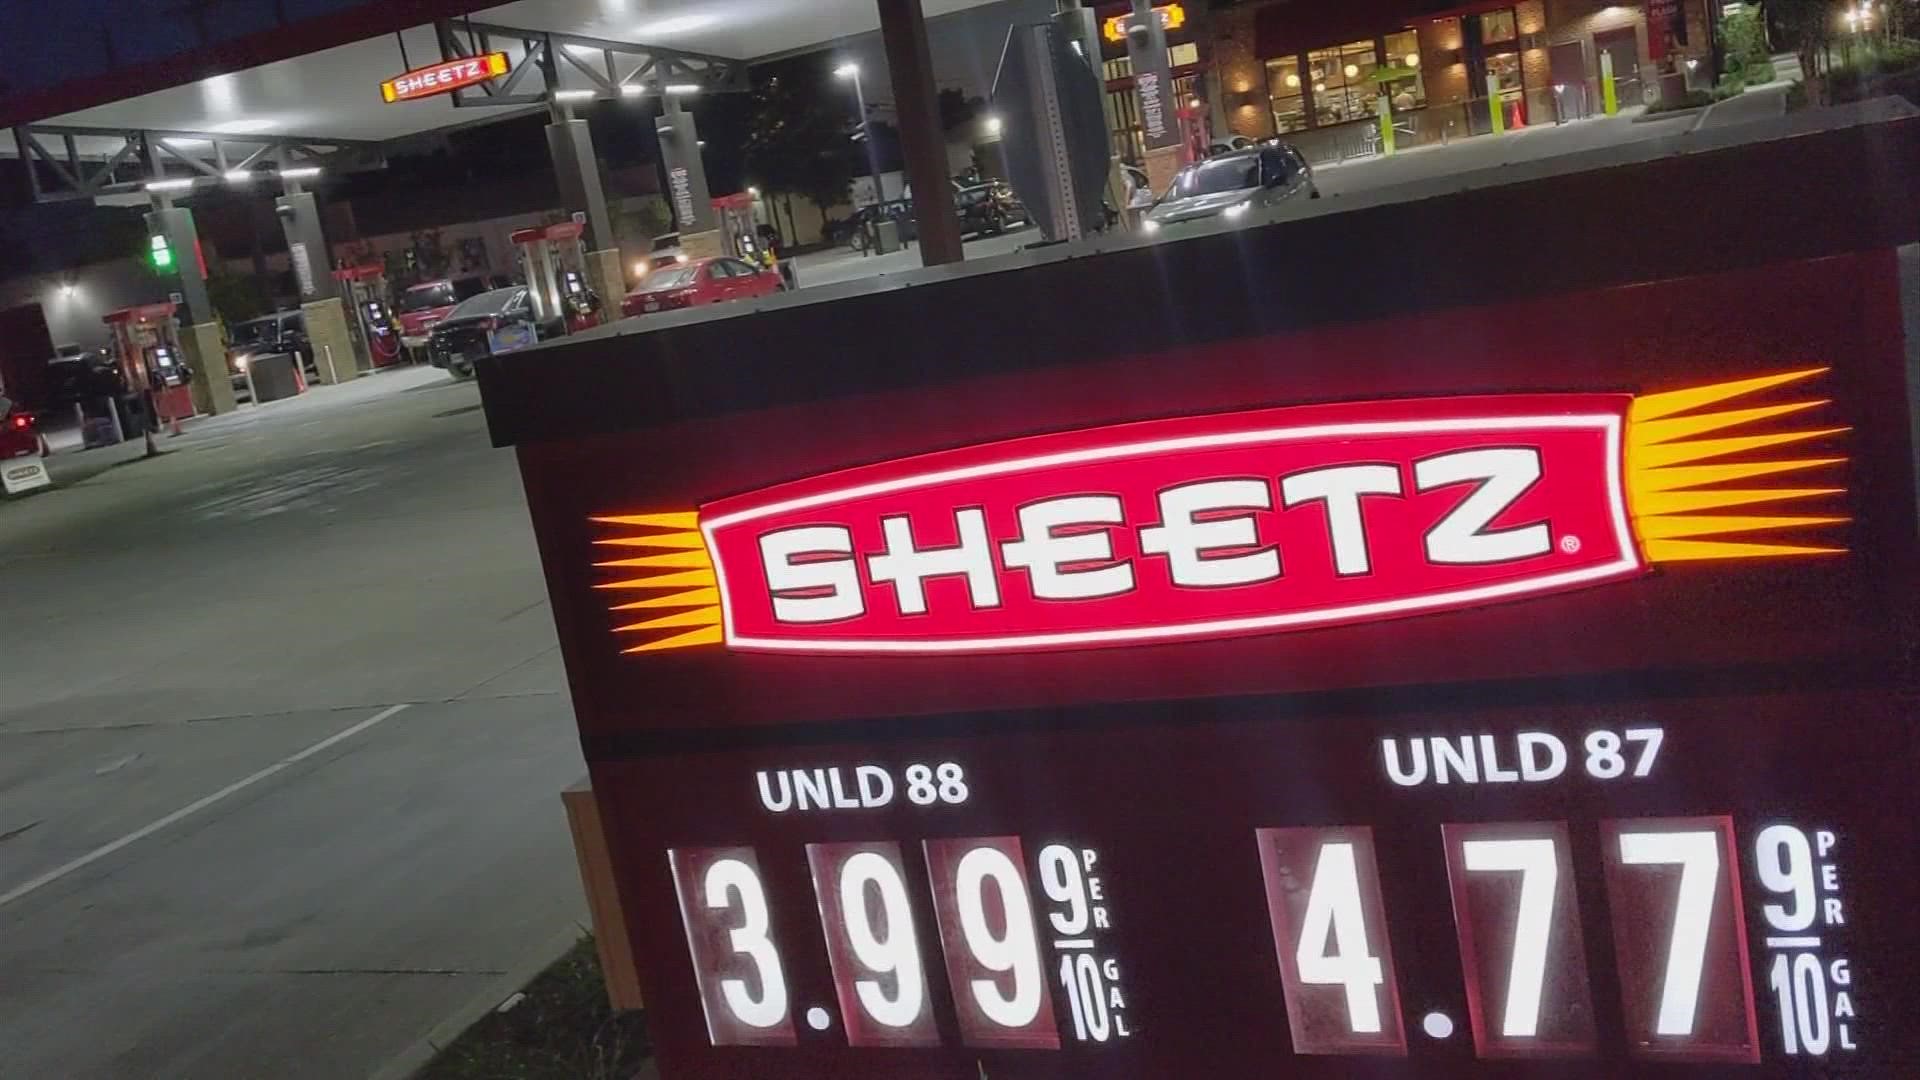 The gas company is reducing the price of its Unleaded 88 fuel to $3.99 a gallon and $3.49 a gallon for E85.